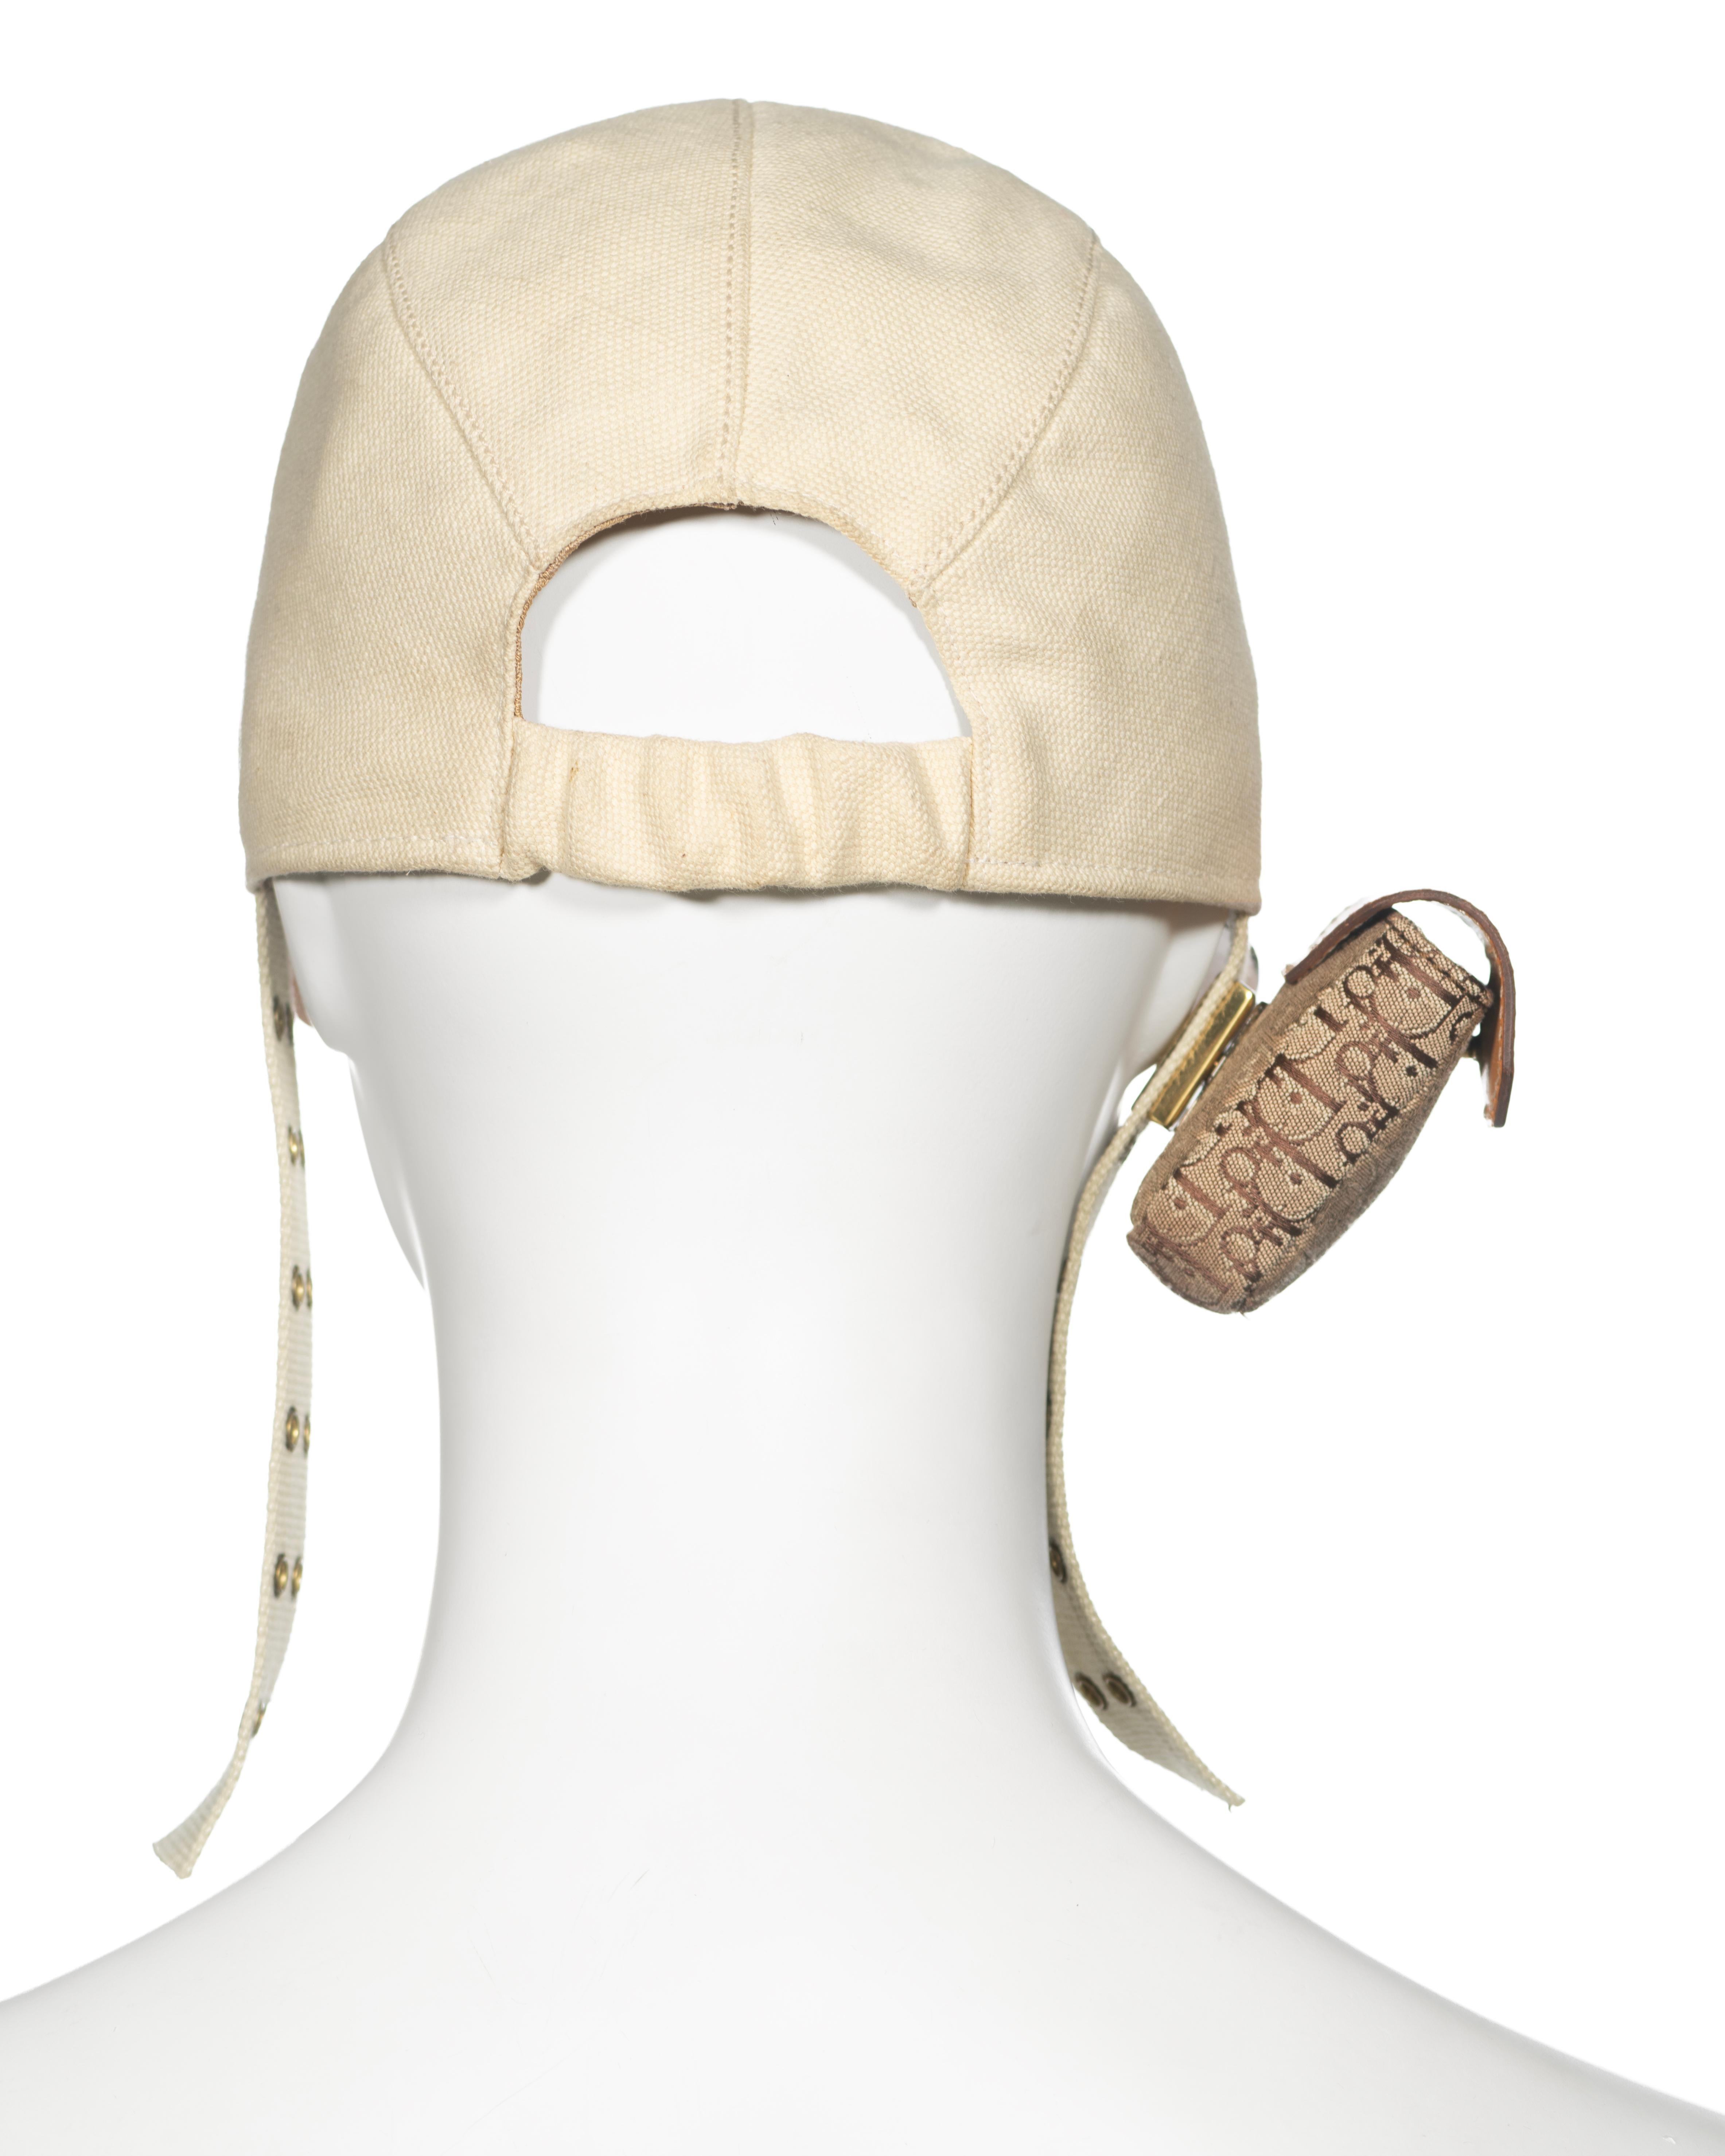 Christian Dior by John Galliano Canvas and Leather Cap with Pouch, ss 2002 For Sale 7